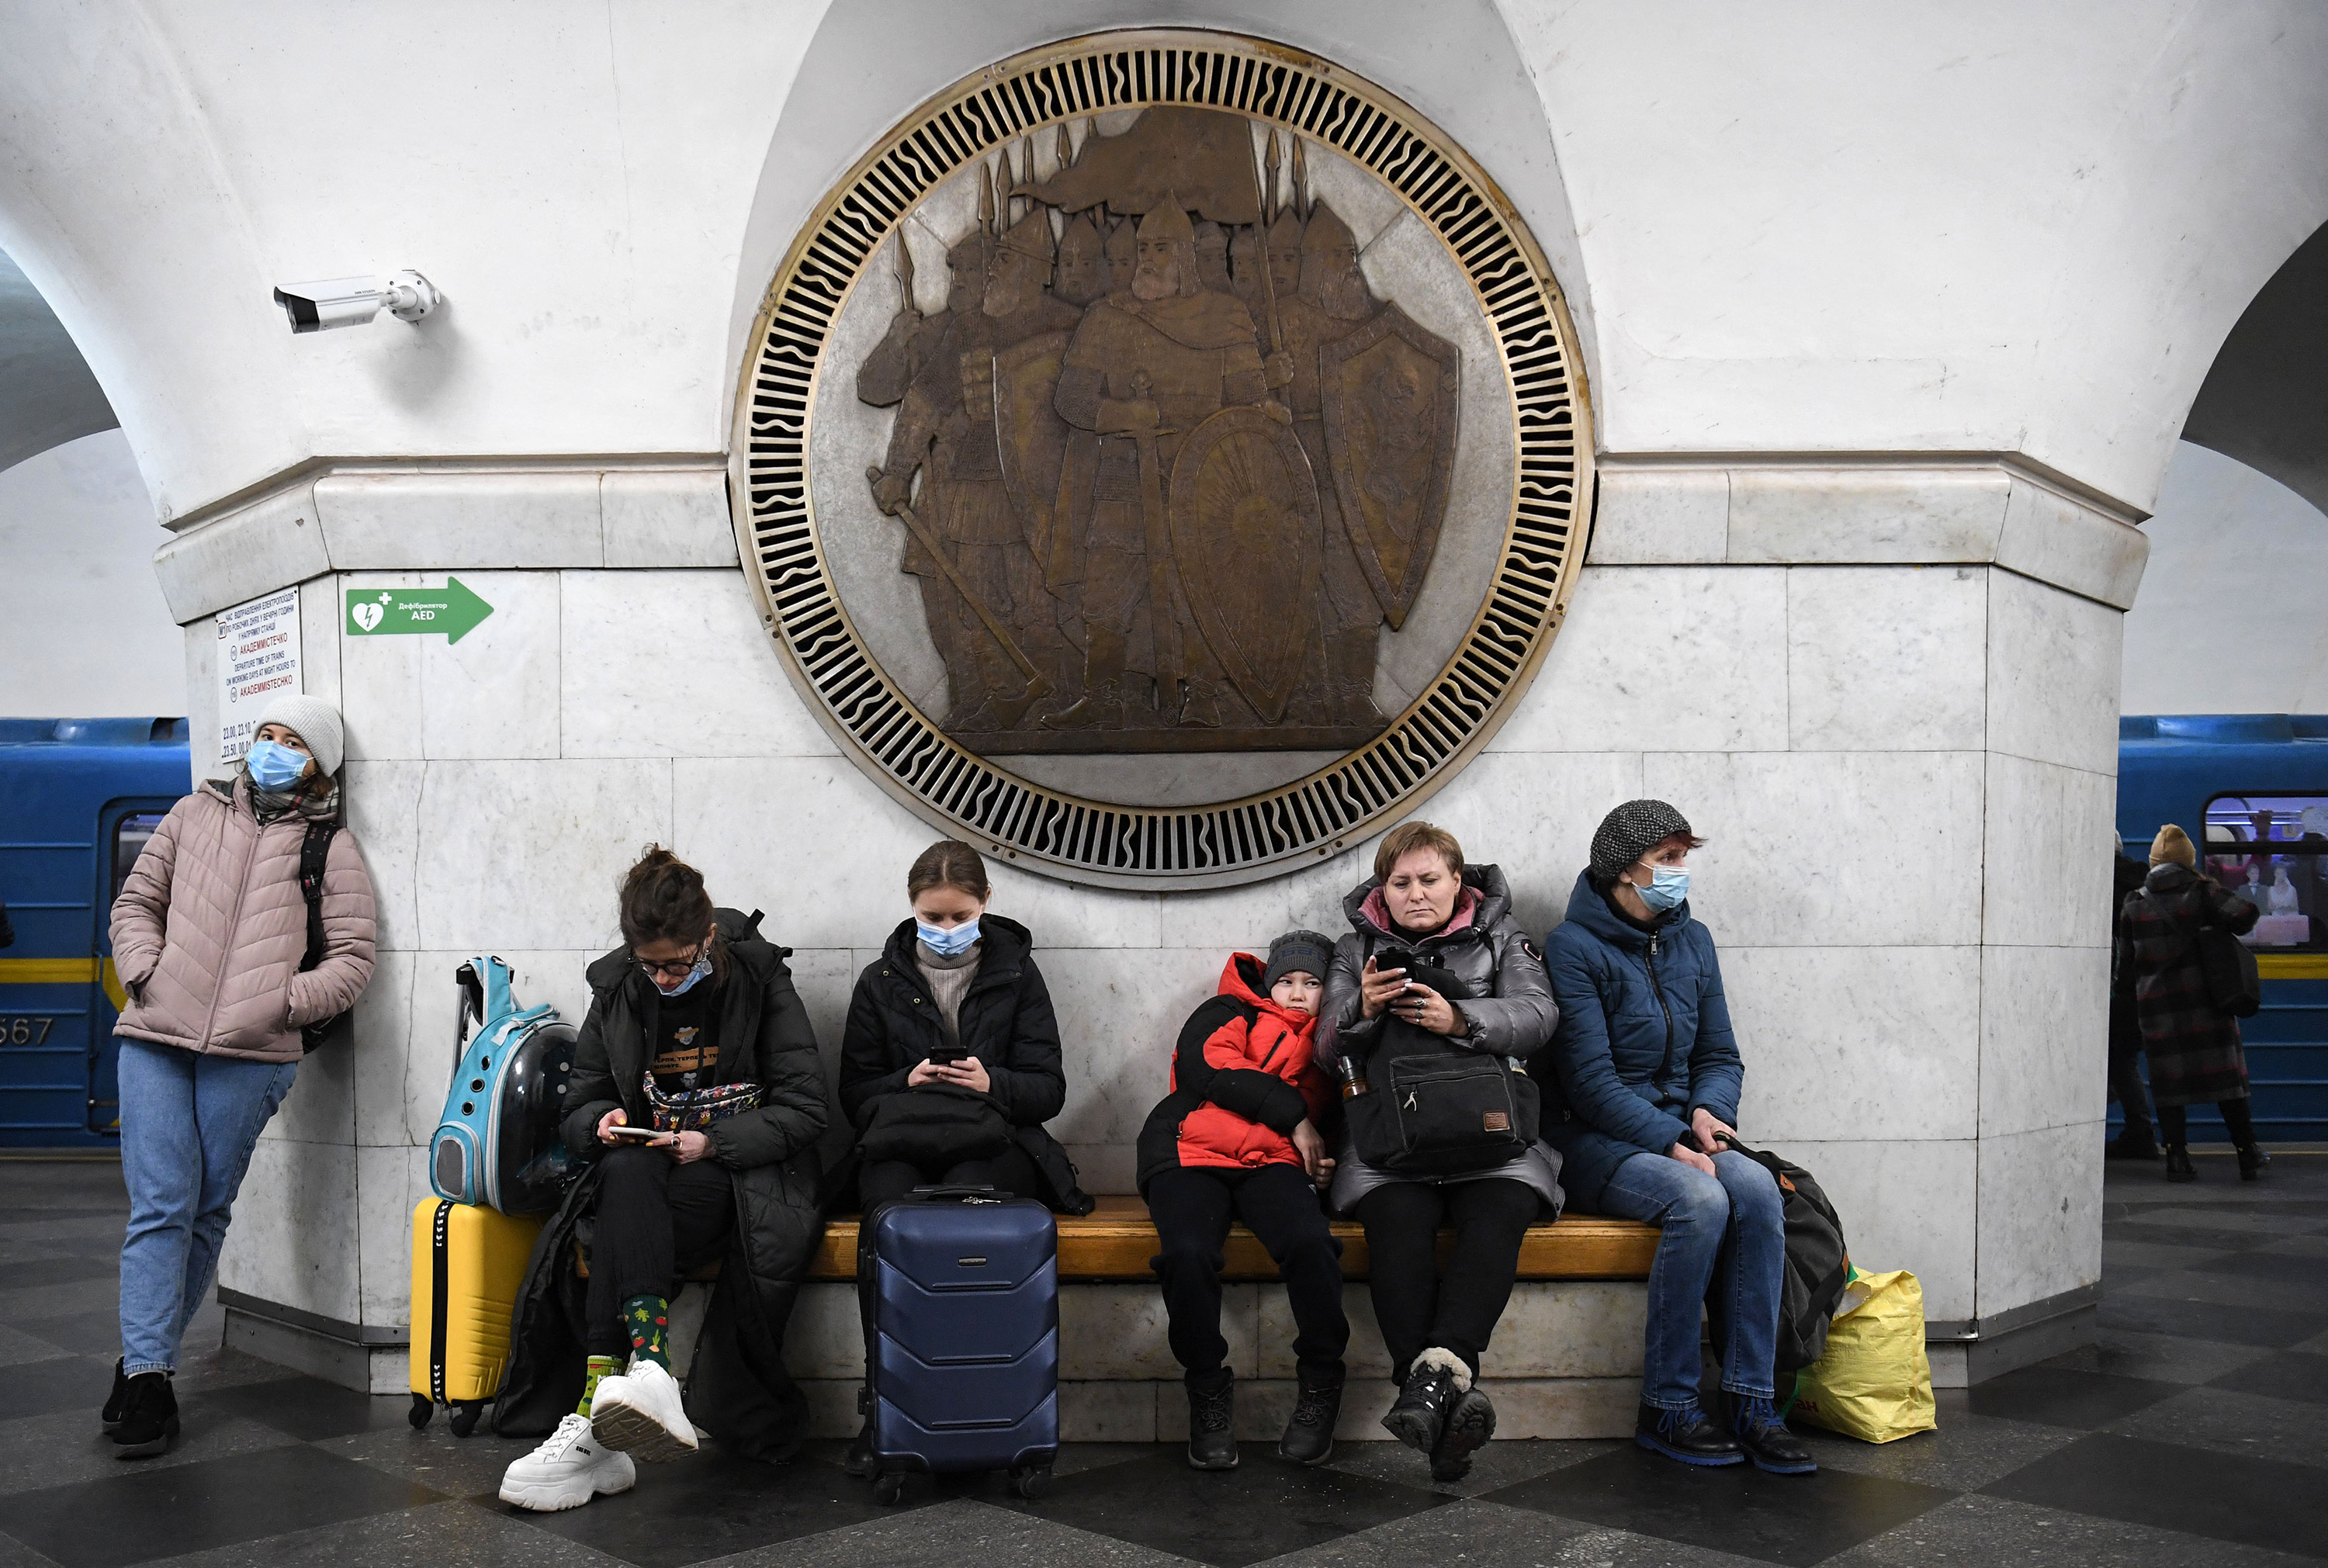 People take shelter in the Vokzalna metro station of Kyiv, Ukraine, on February 24. (Daniel Leal/AFP/Getty Images)